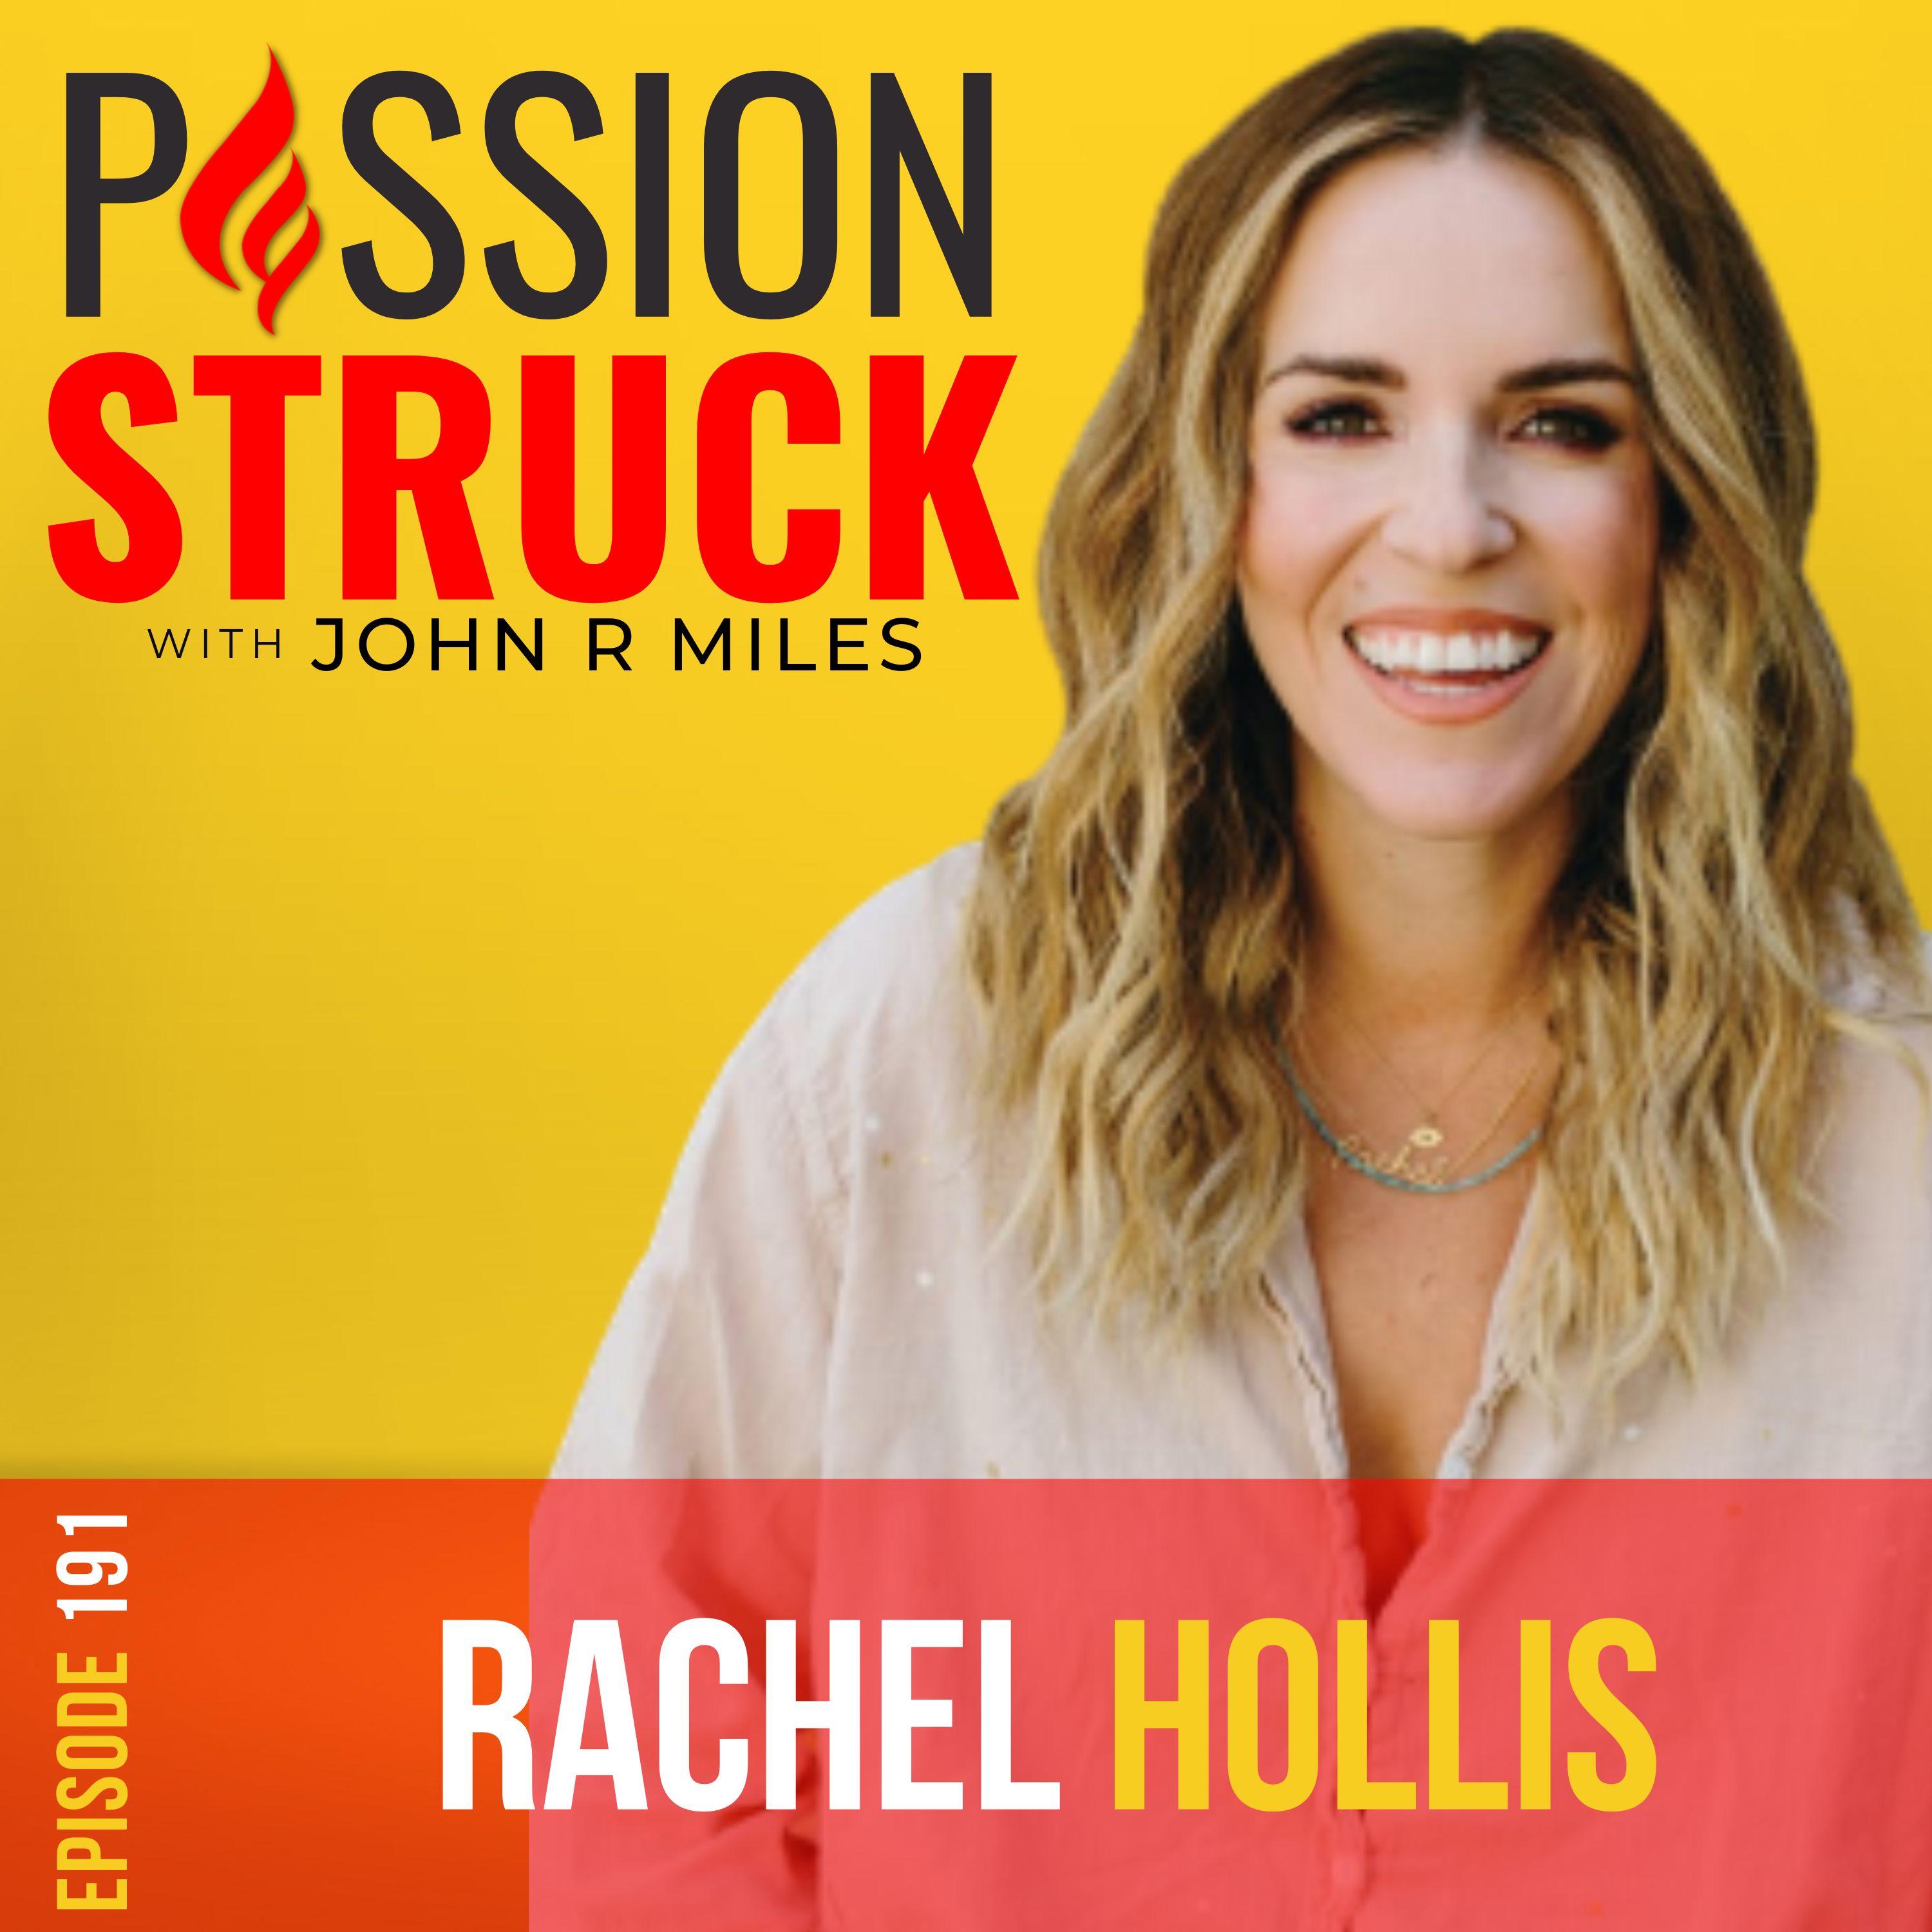 Passion Struck with John R. Miles episode 191 with Rachel Hollis